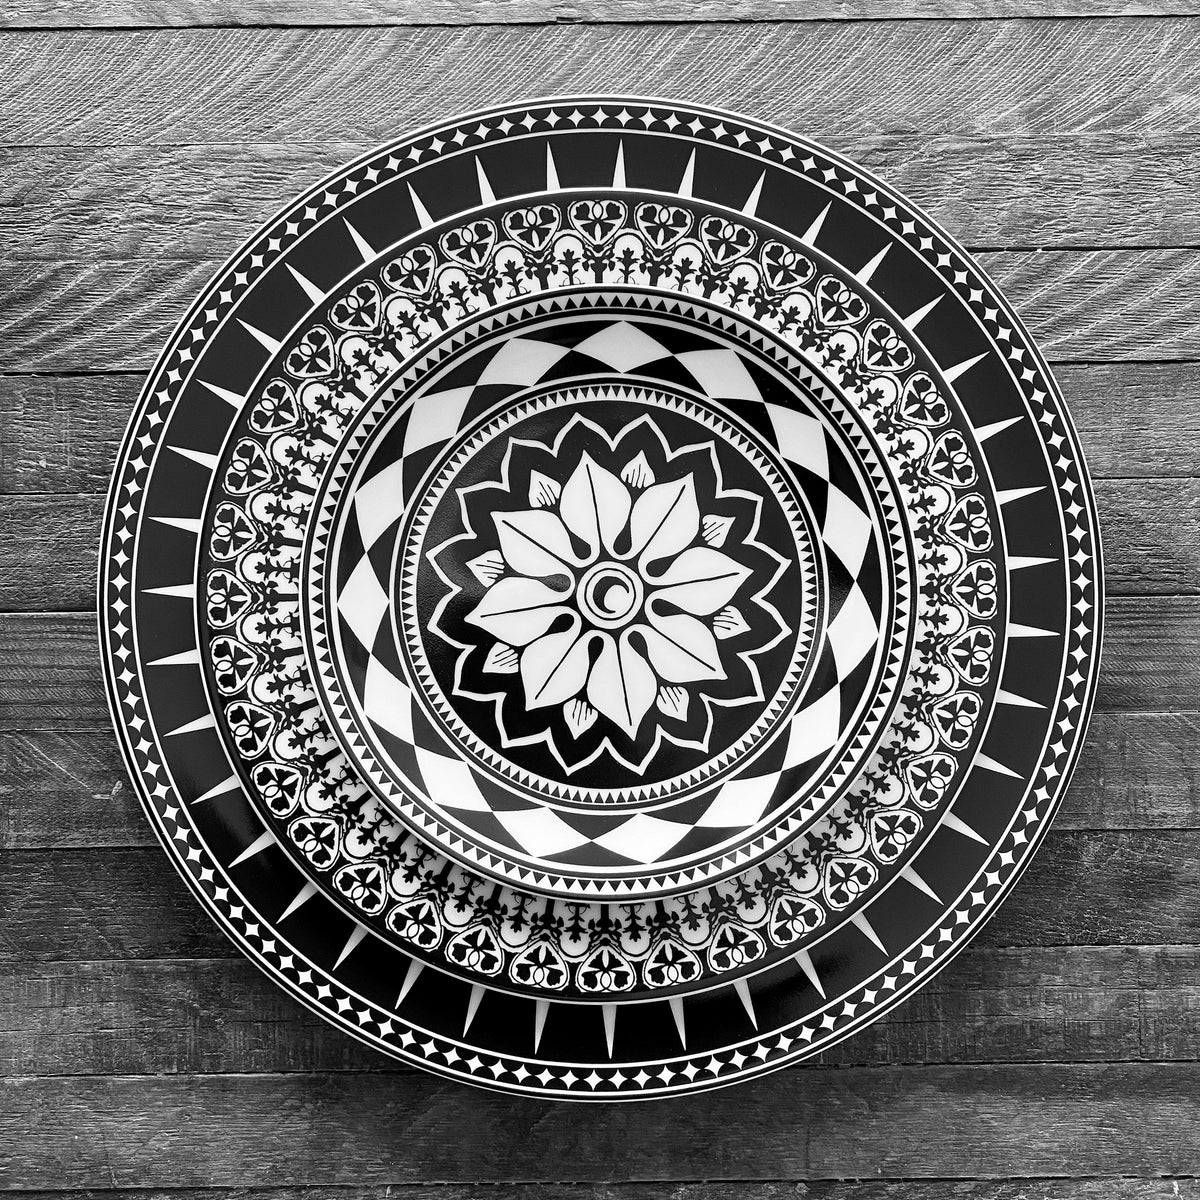 A black and white photo of the Marrakech Black Rimmed Dinner Plate with a flower design, found in the markets of Morocco, by Caskata Artisanal Home.